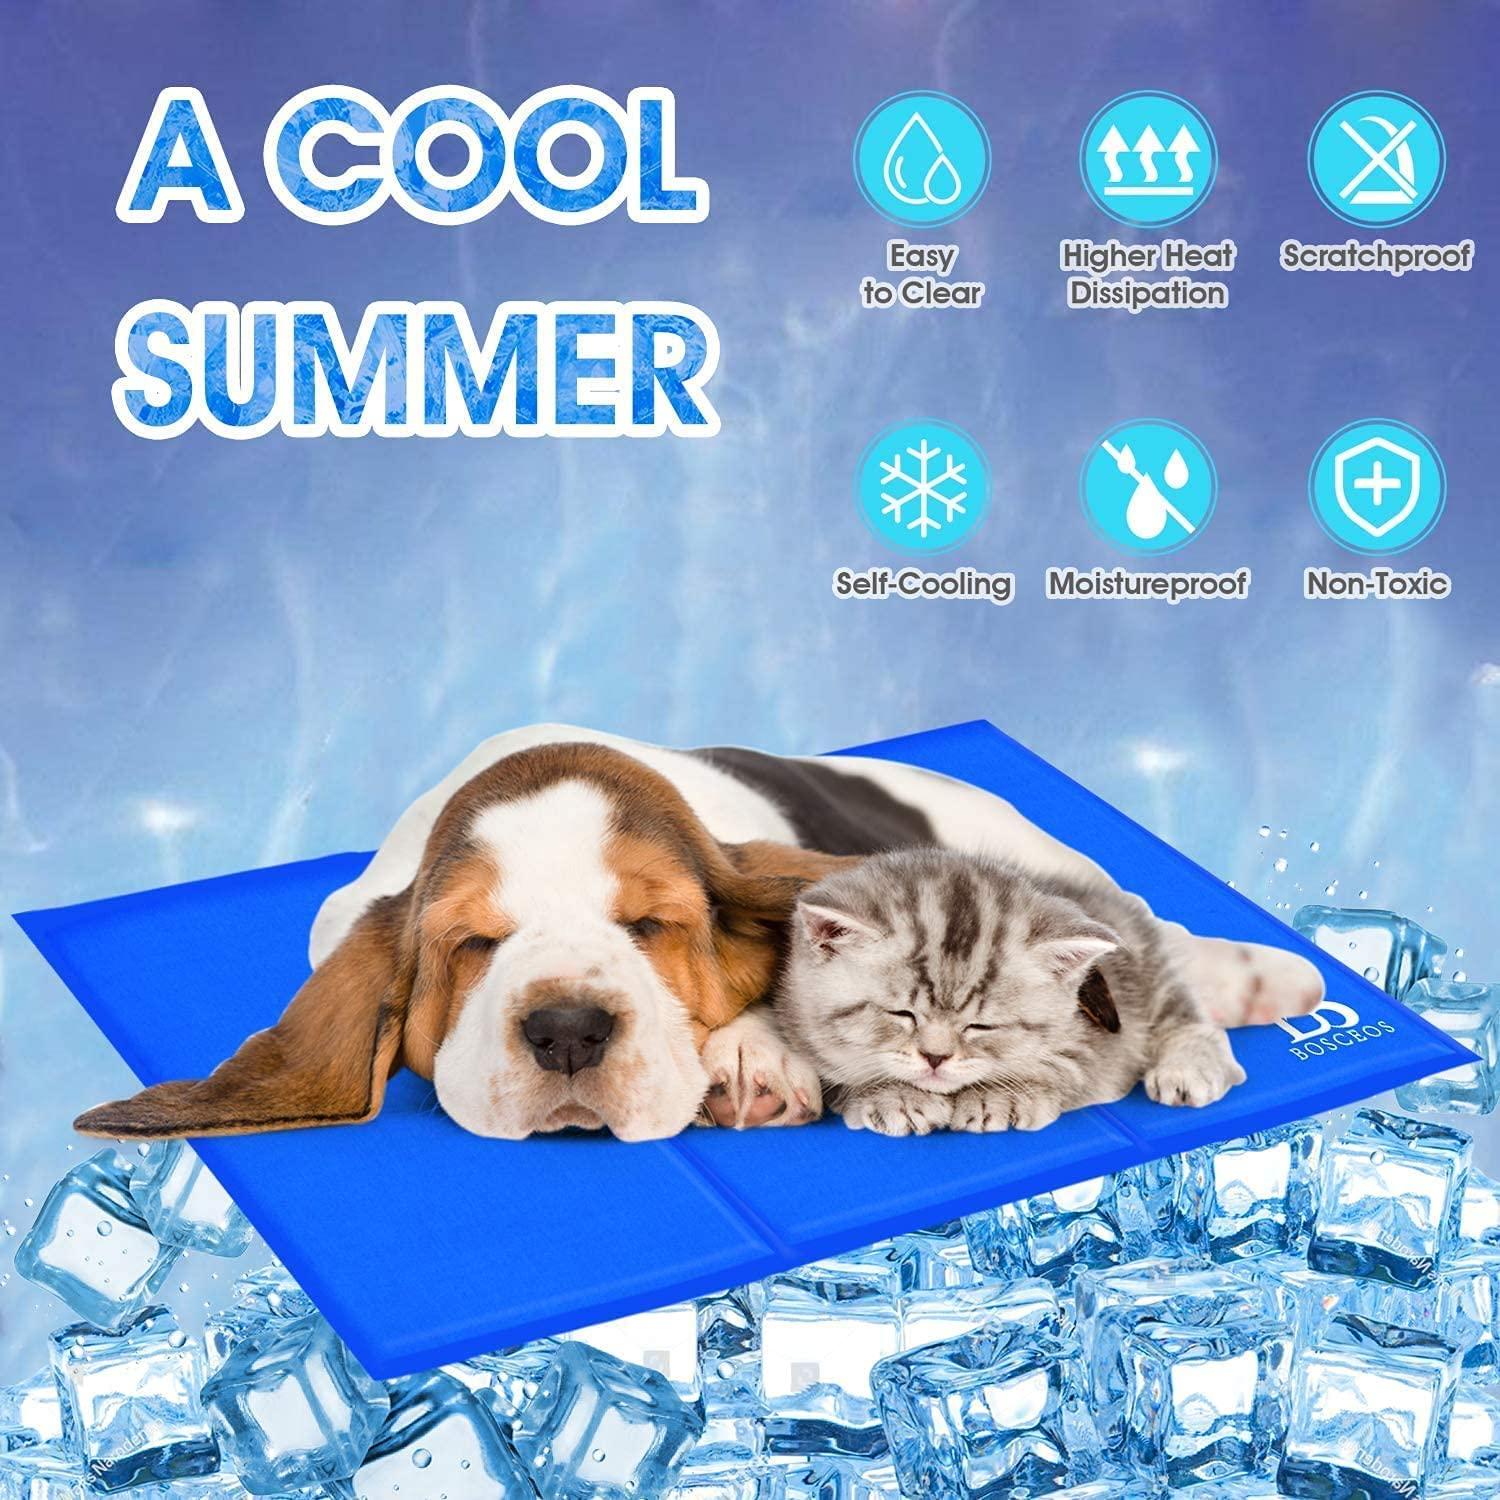 Bosceos Large Dog Cooling Mat, Waterproof Scratch-proof Activated Gel Cooling Pad for Dogs, Non-Toxic, Great Dog Accessories to Help Your Pet Stay Cool This Summer, Ideal for Home & Travel, 90x50cm 3